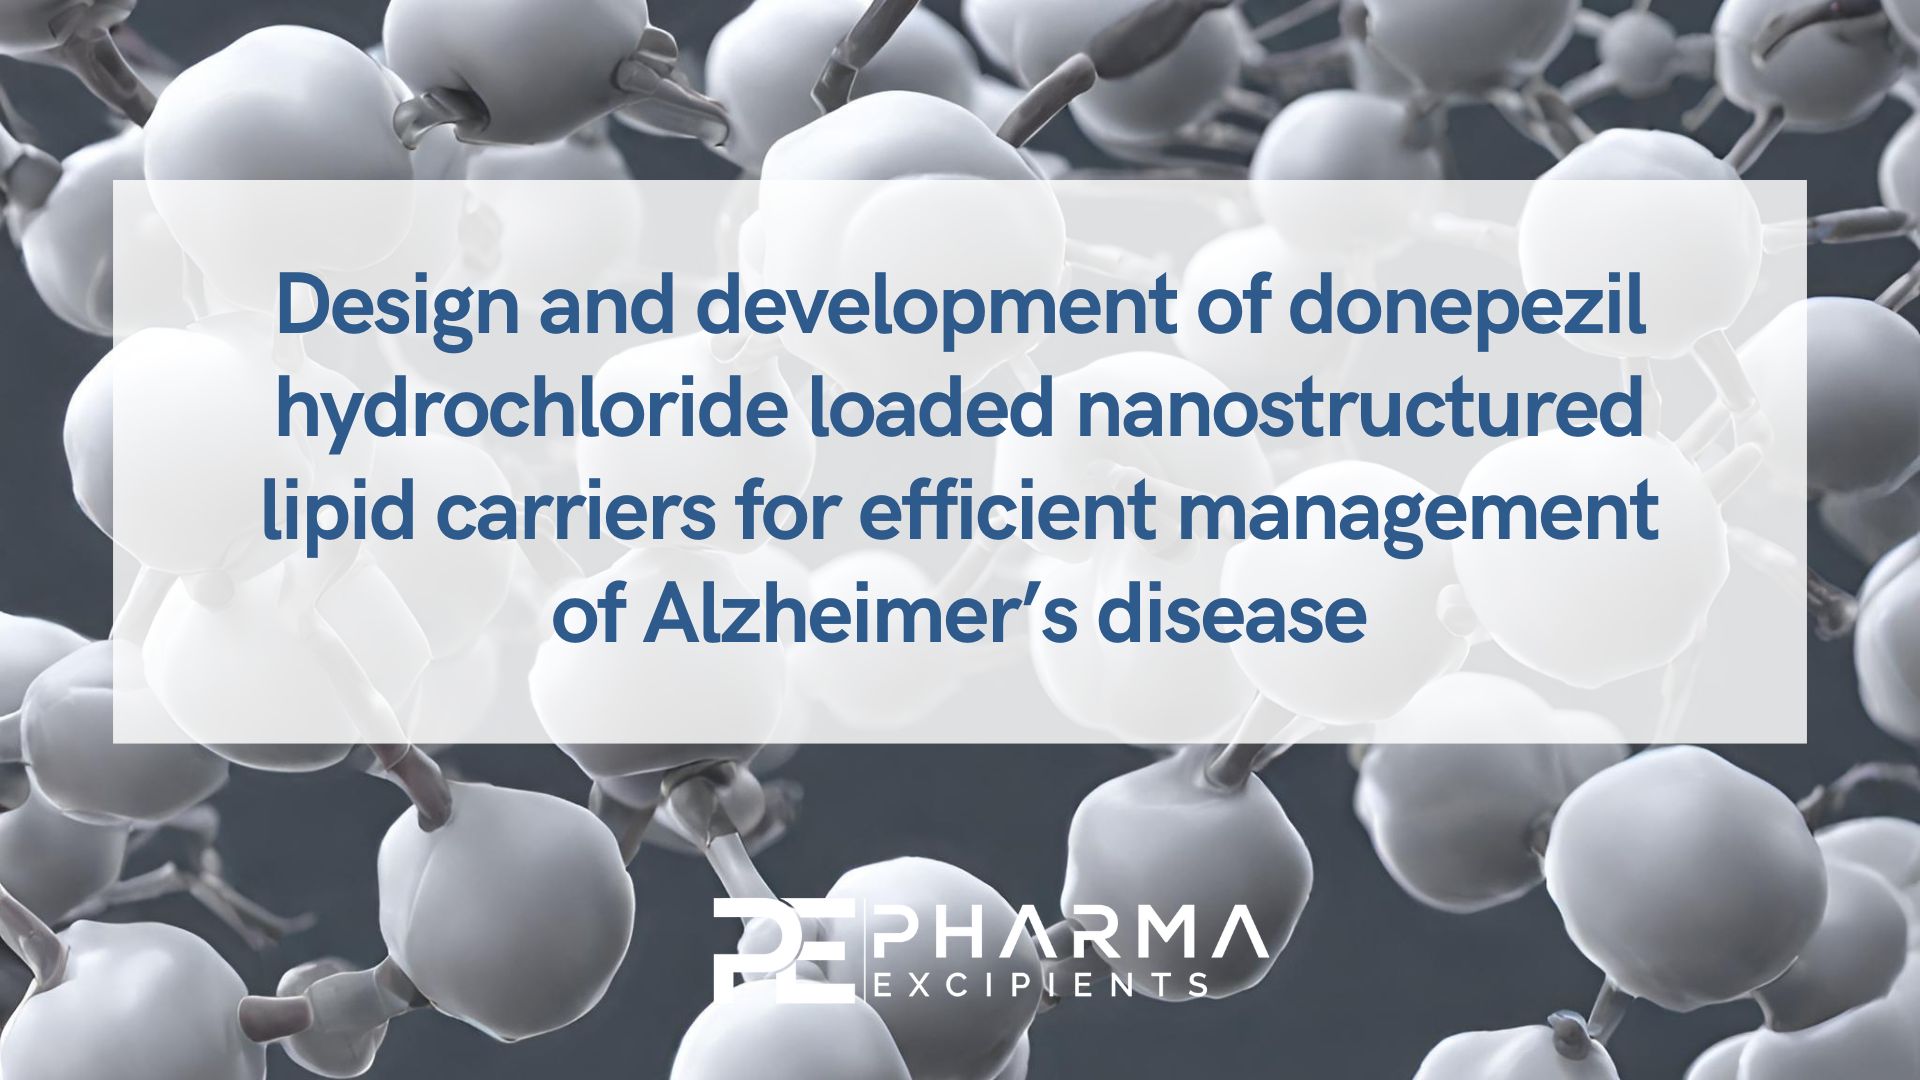 Design and development of donepezil hydrochloride loaded nanostructured lipid carriers for efficient management of Alzheimer’s disease